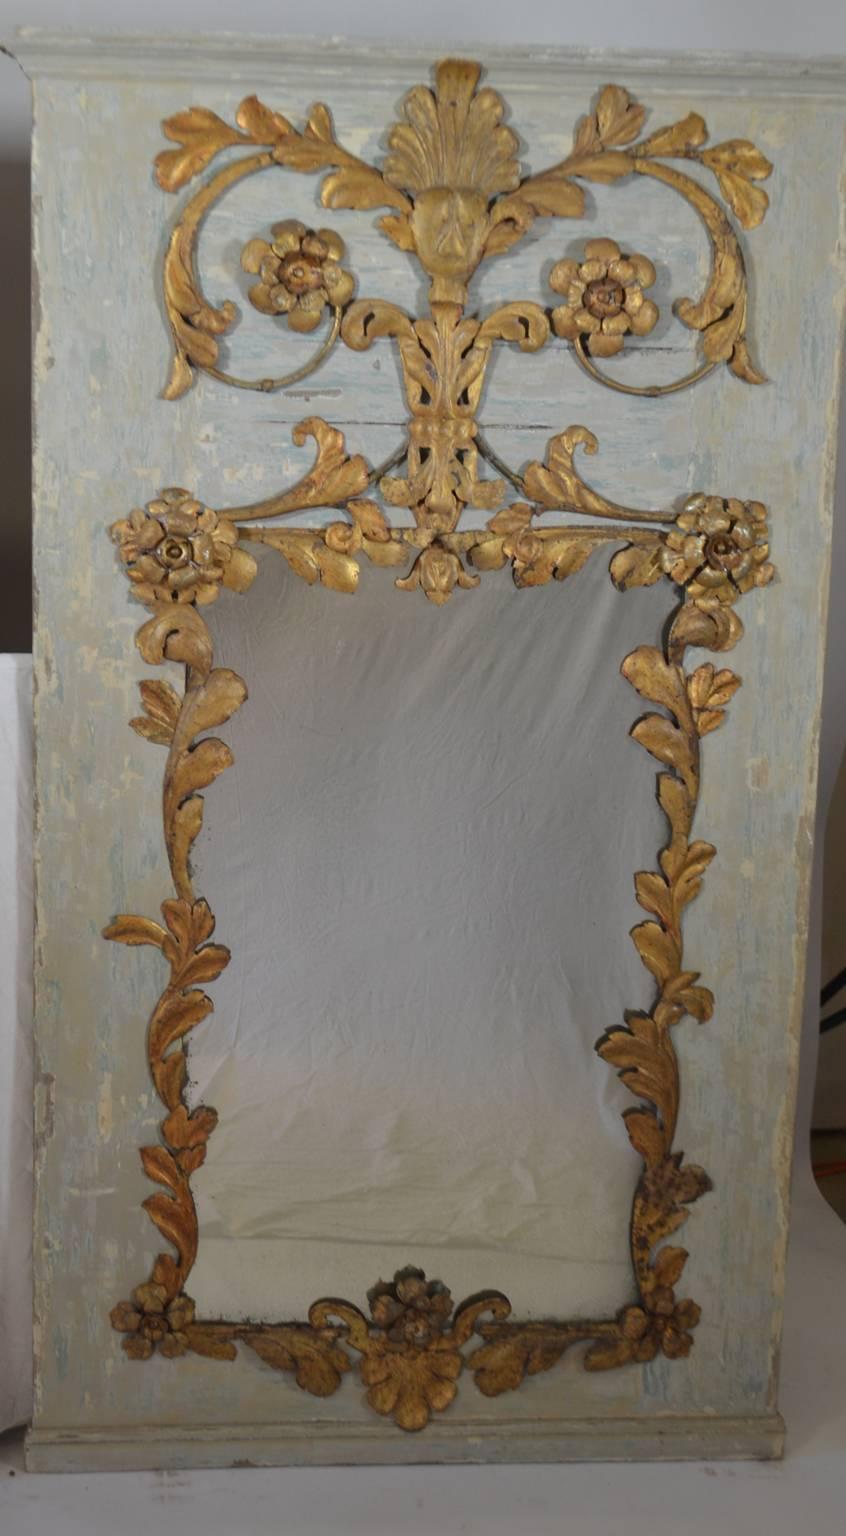 Pair of Gilded Venetian Mirrors, assembled with 18th century elements. 